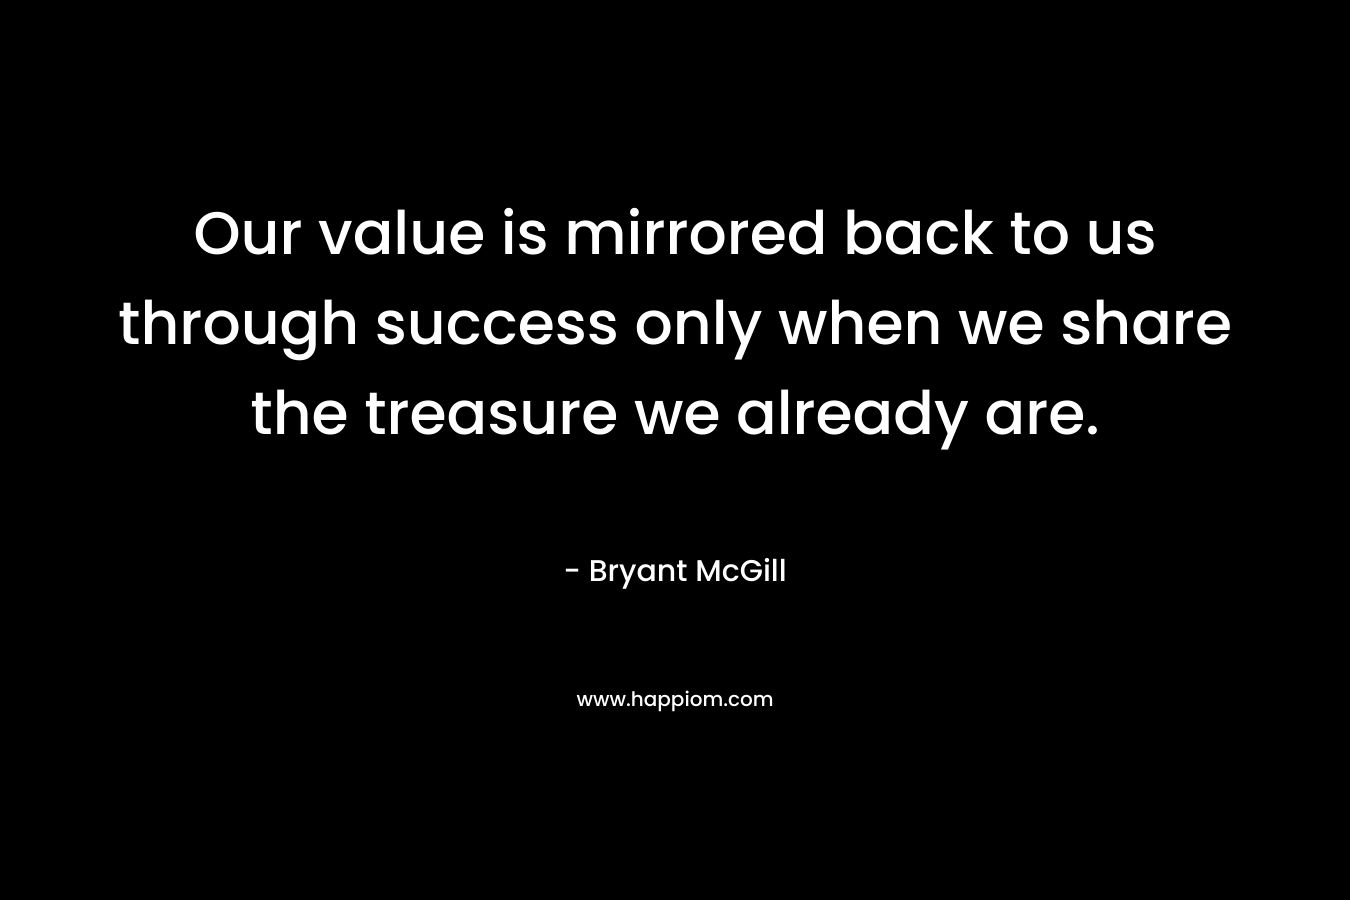 Our value is mirrored back to us through success only when we share the treasure we already are. – Bryant McGill